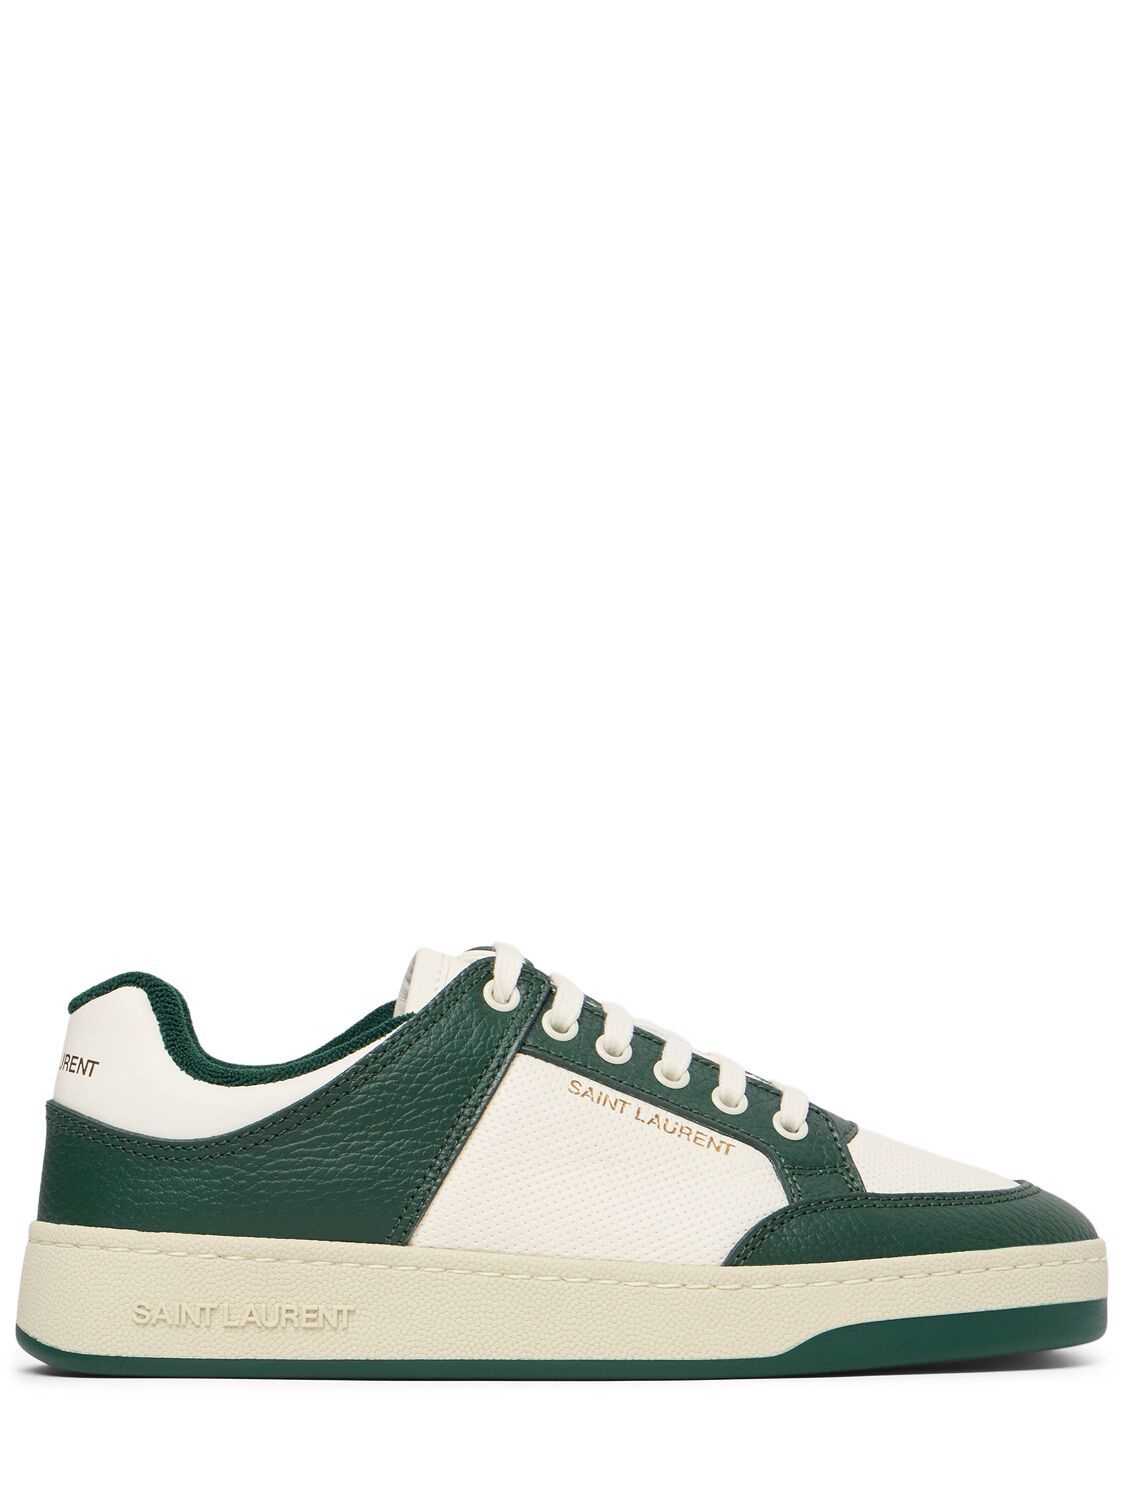 Sl/61 00 Leather Sneakers